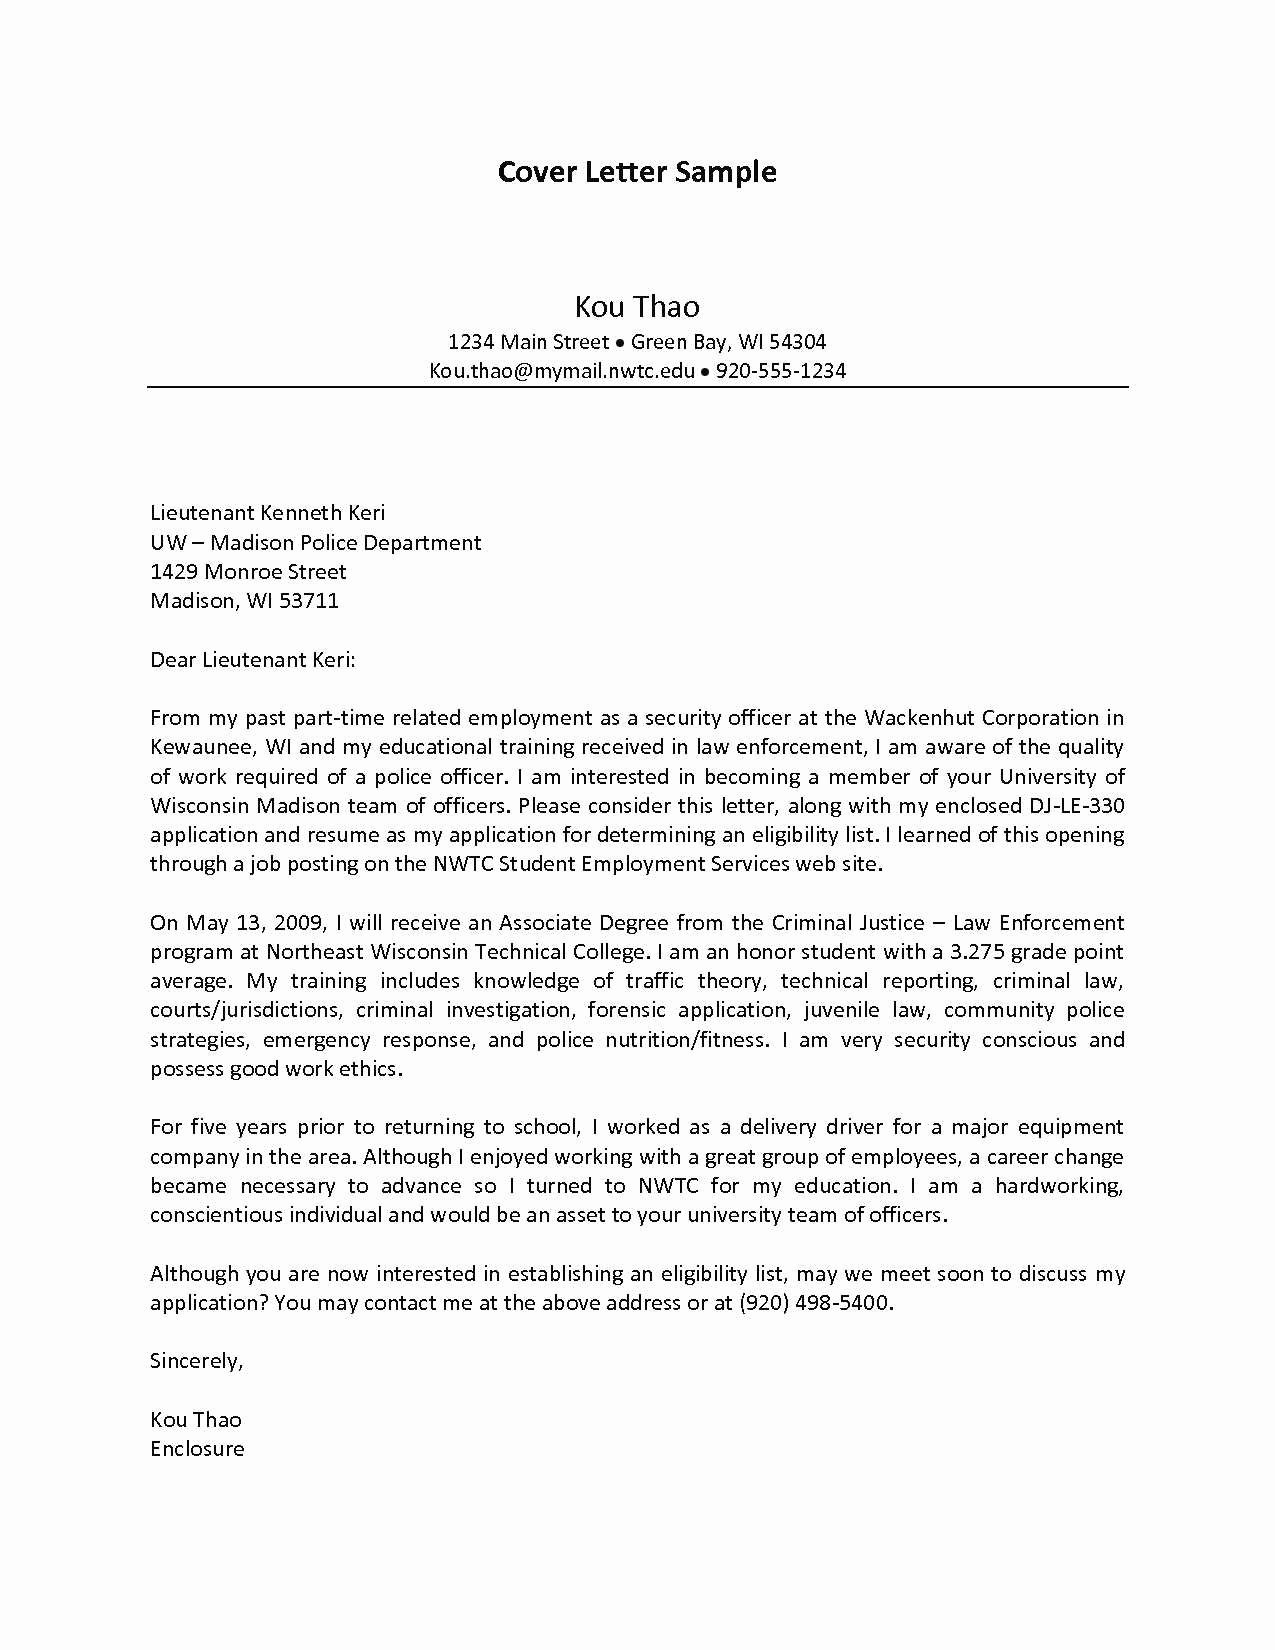 Law School Recommendation Letter Example New Valid Re Mendation Letter Example Law School